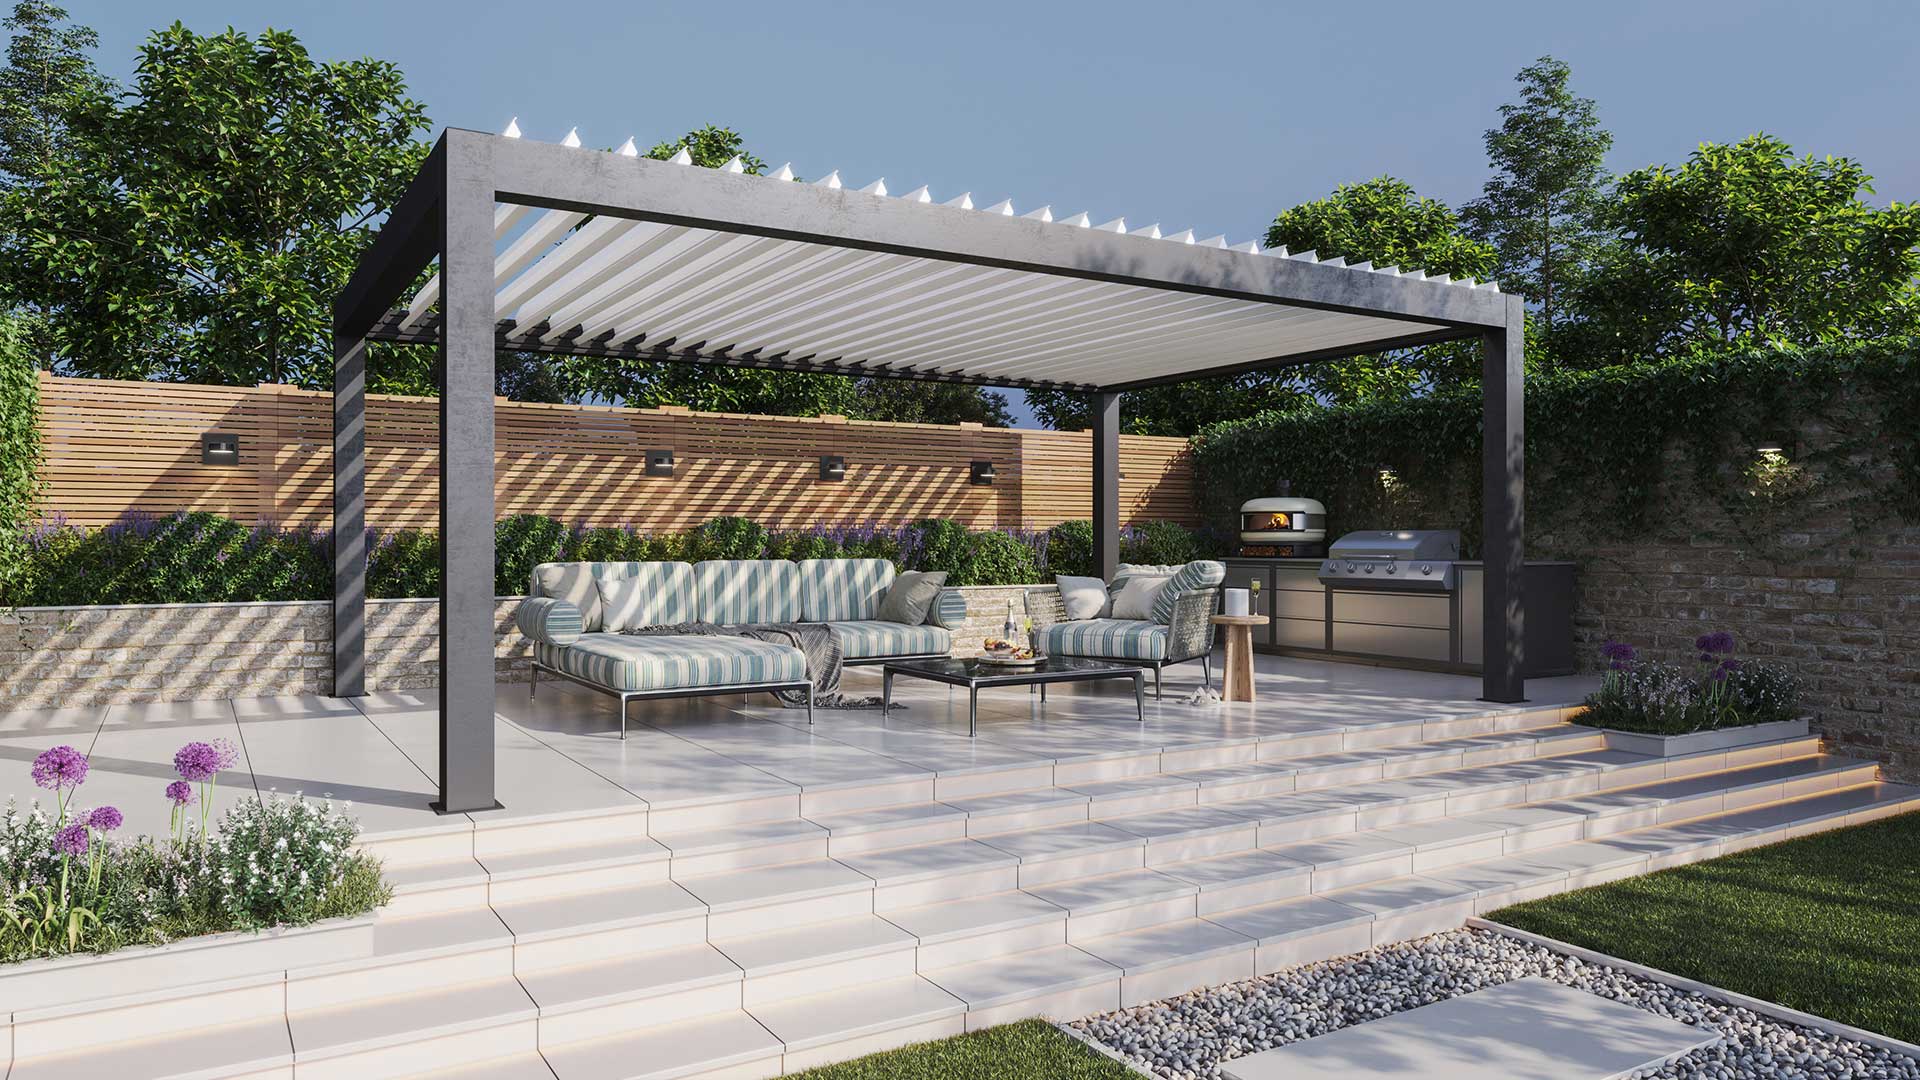 Grey sliding pergola covering outdoor seating area with grey patio furniture